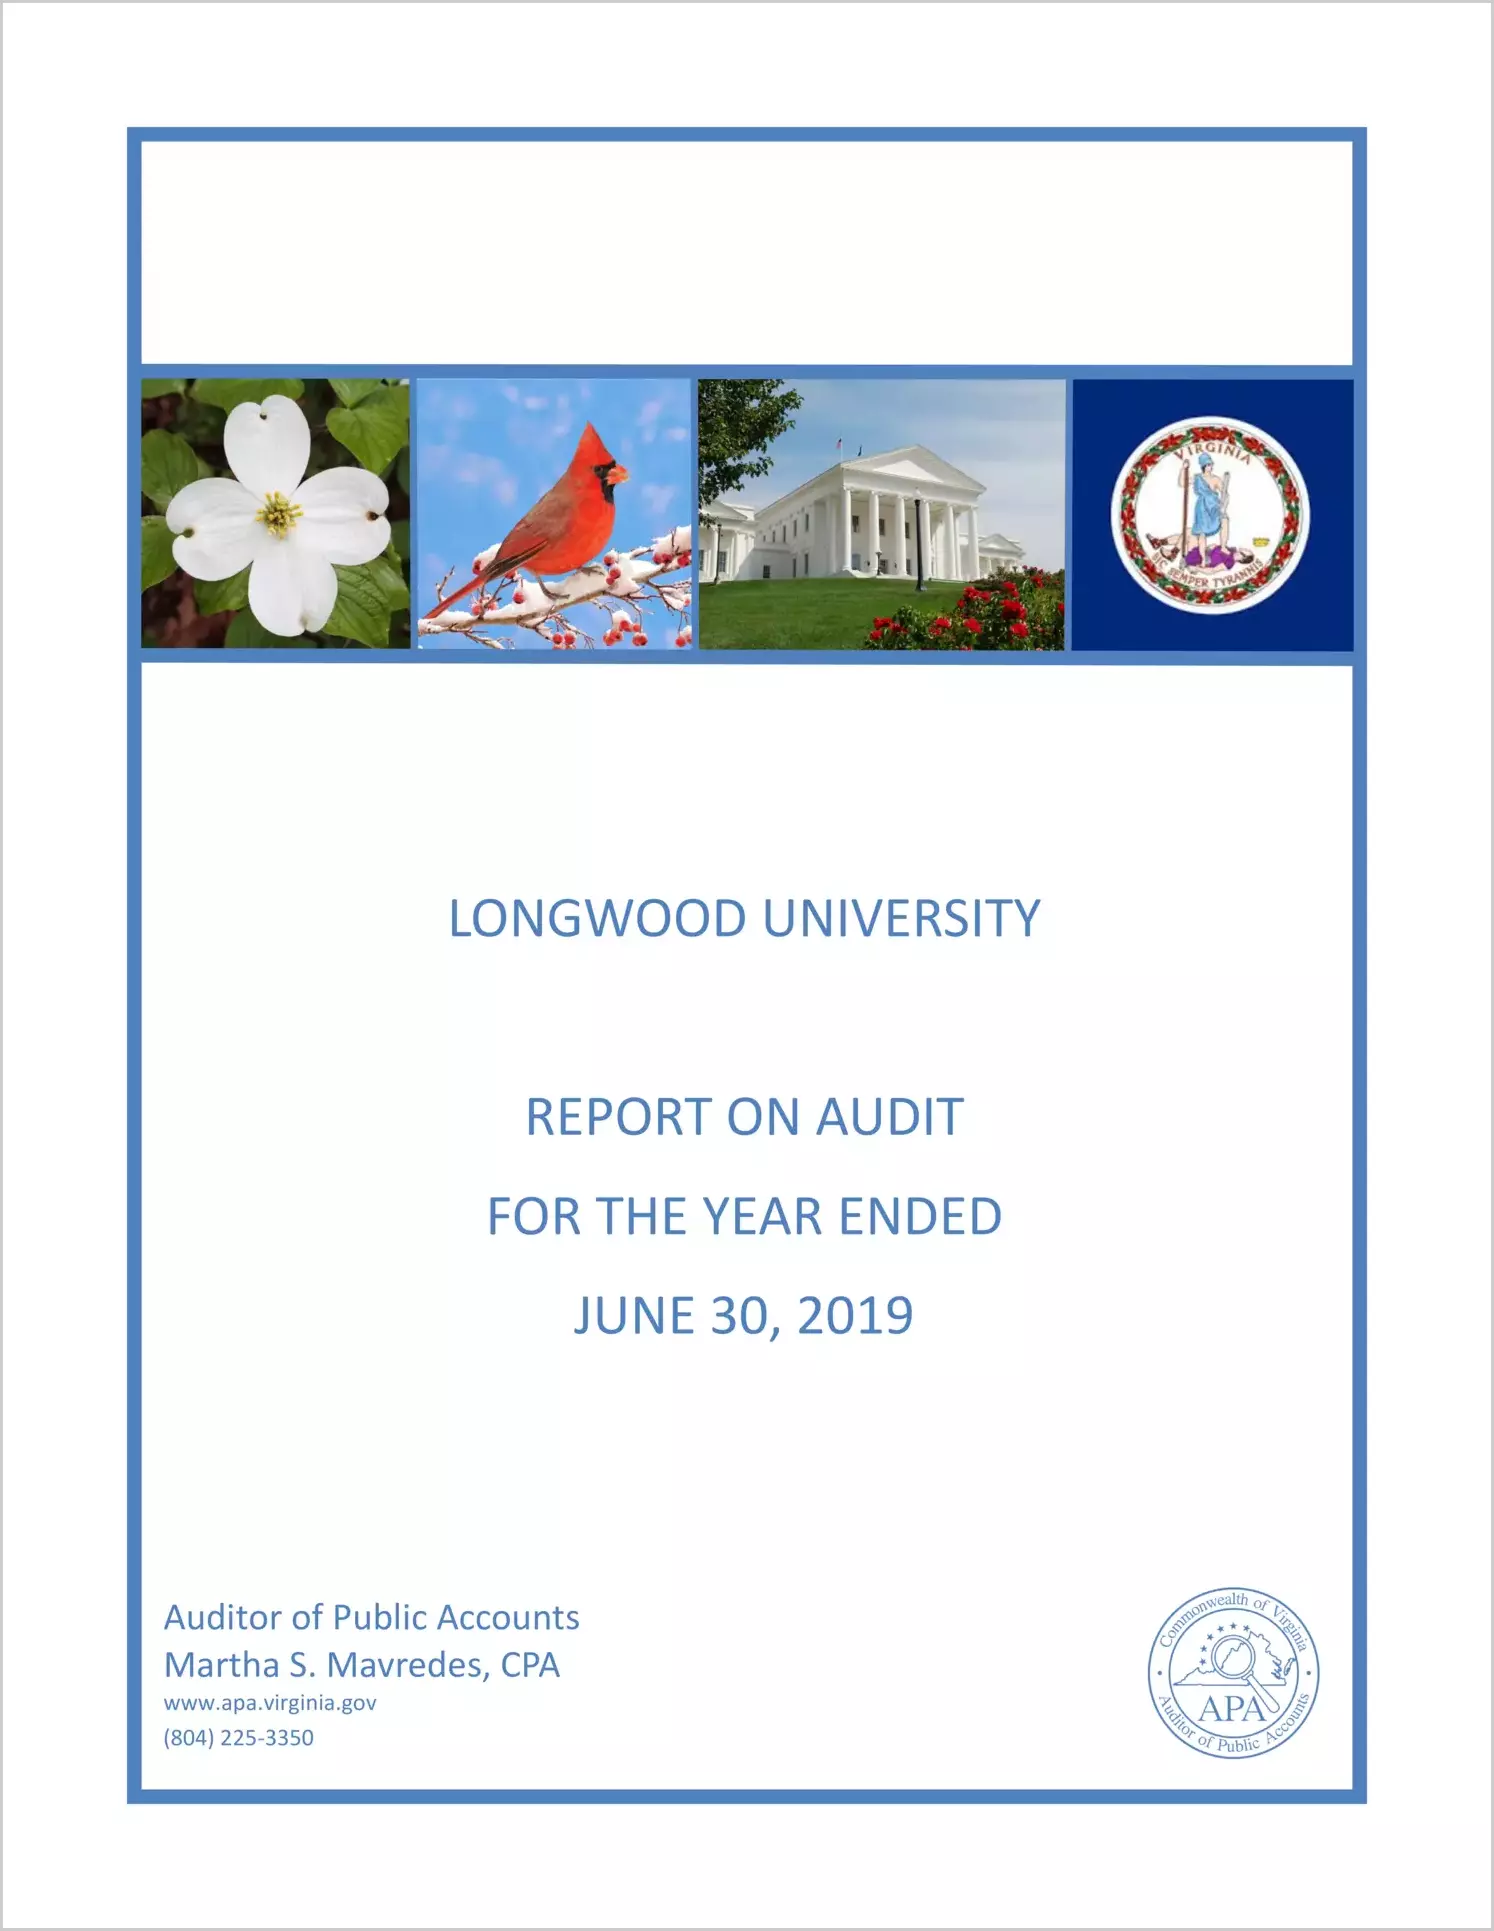 Longwood University for the year ended June 30, 2019